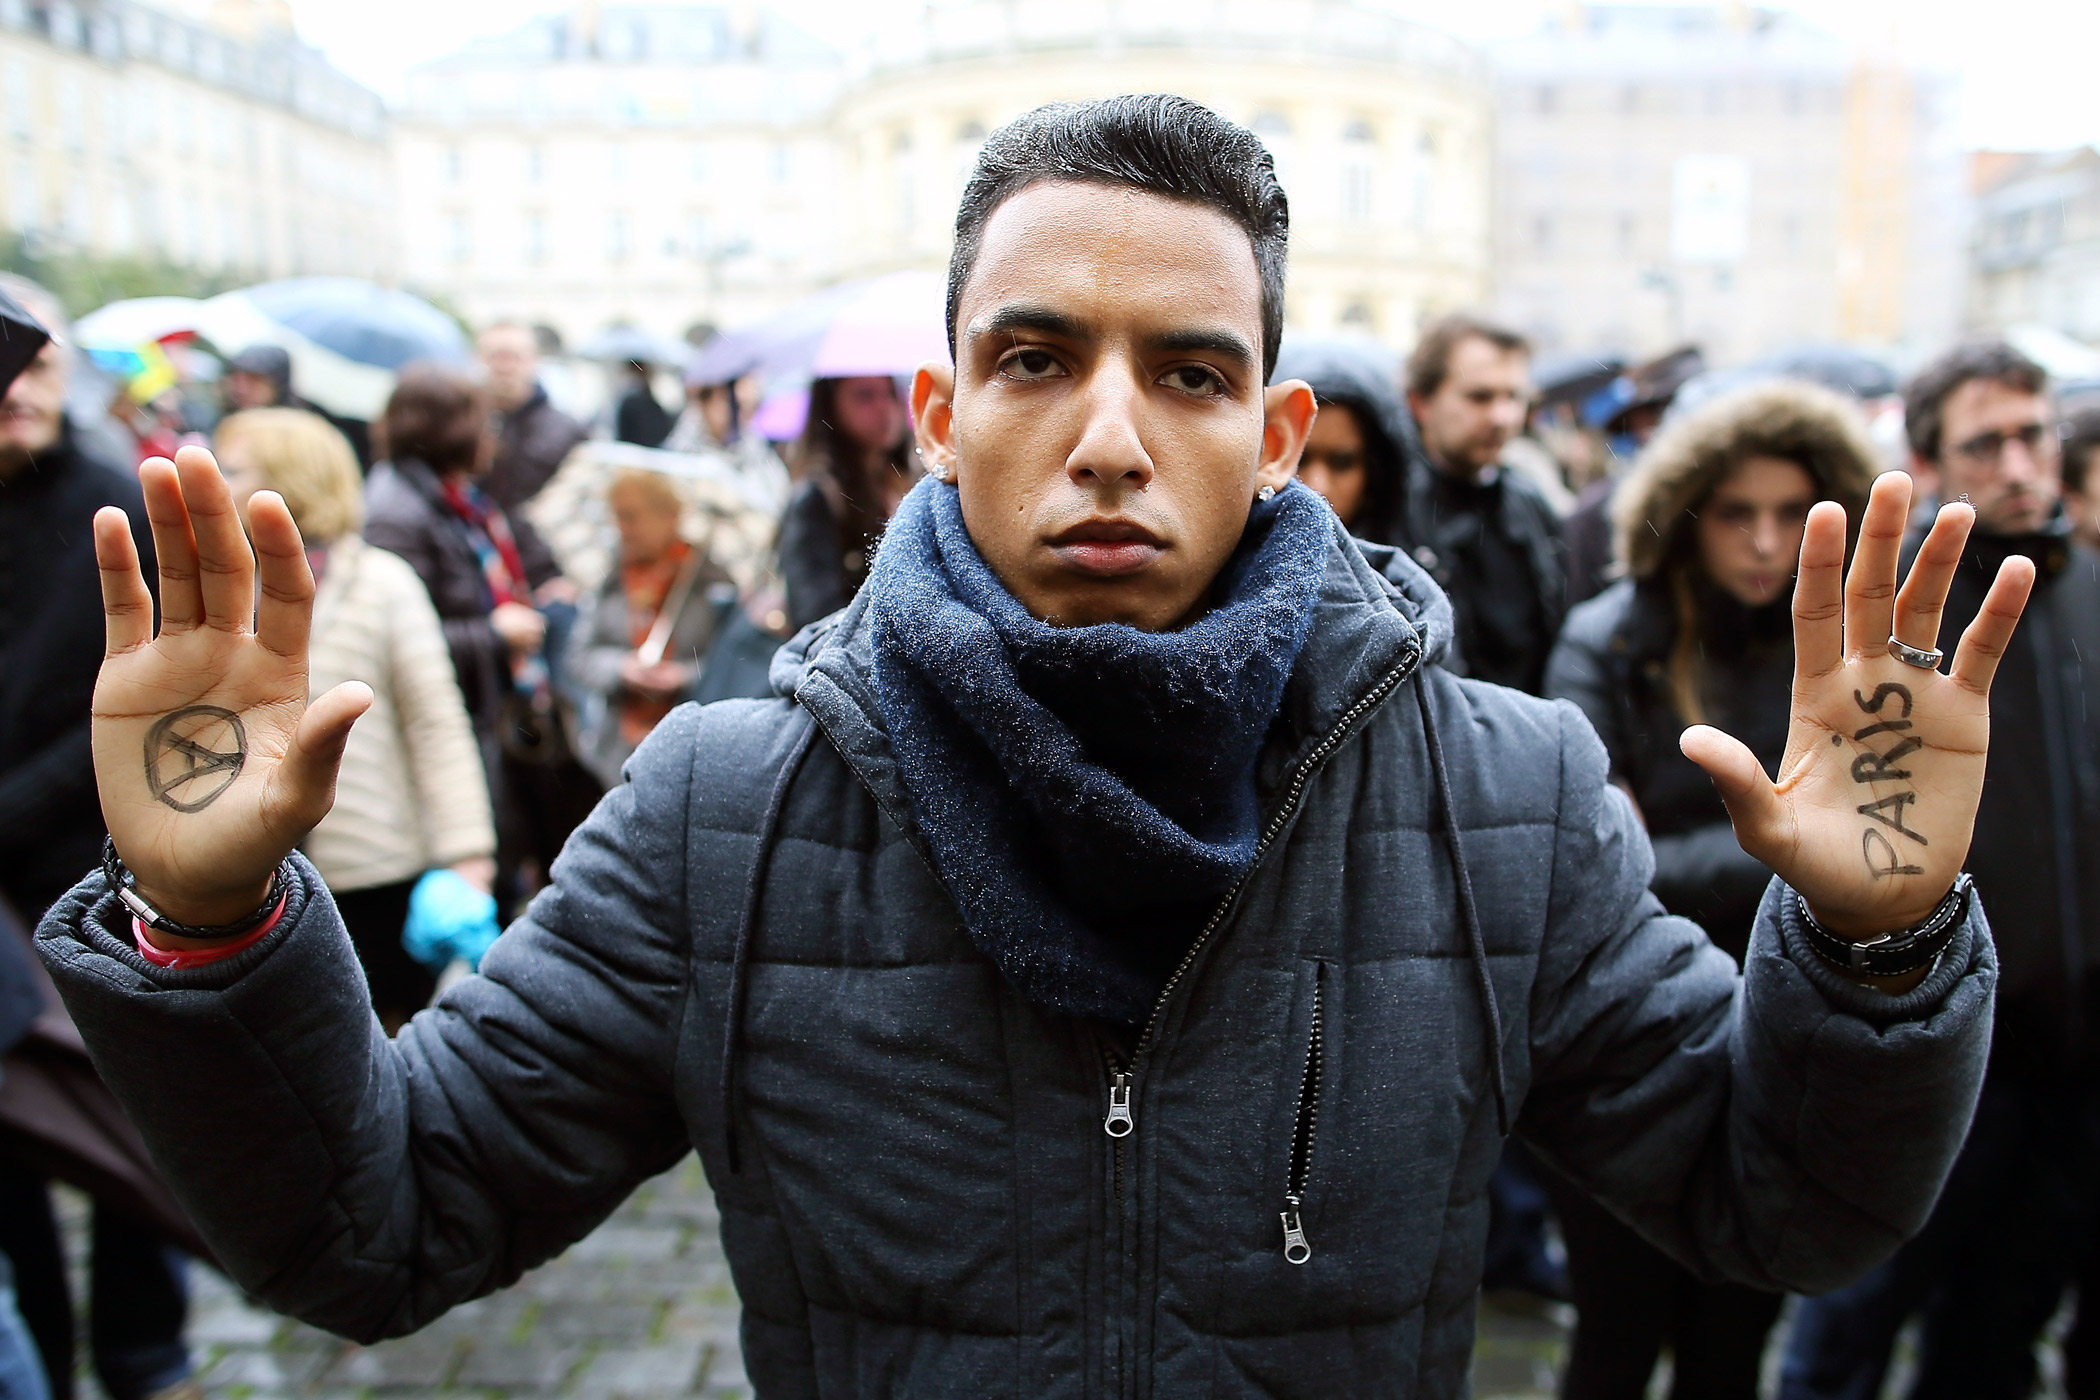 A man holds up his hands during a minute of silence for victims of Paris attacks in Rennes, western France.